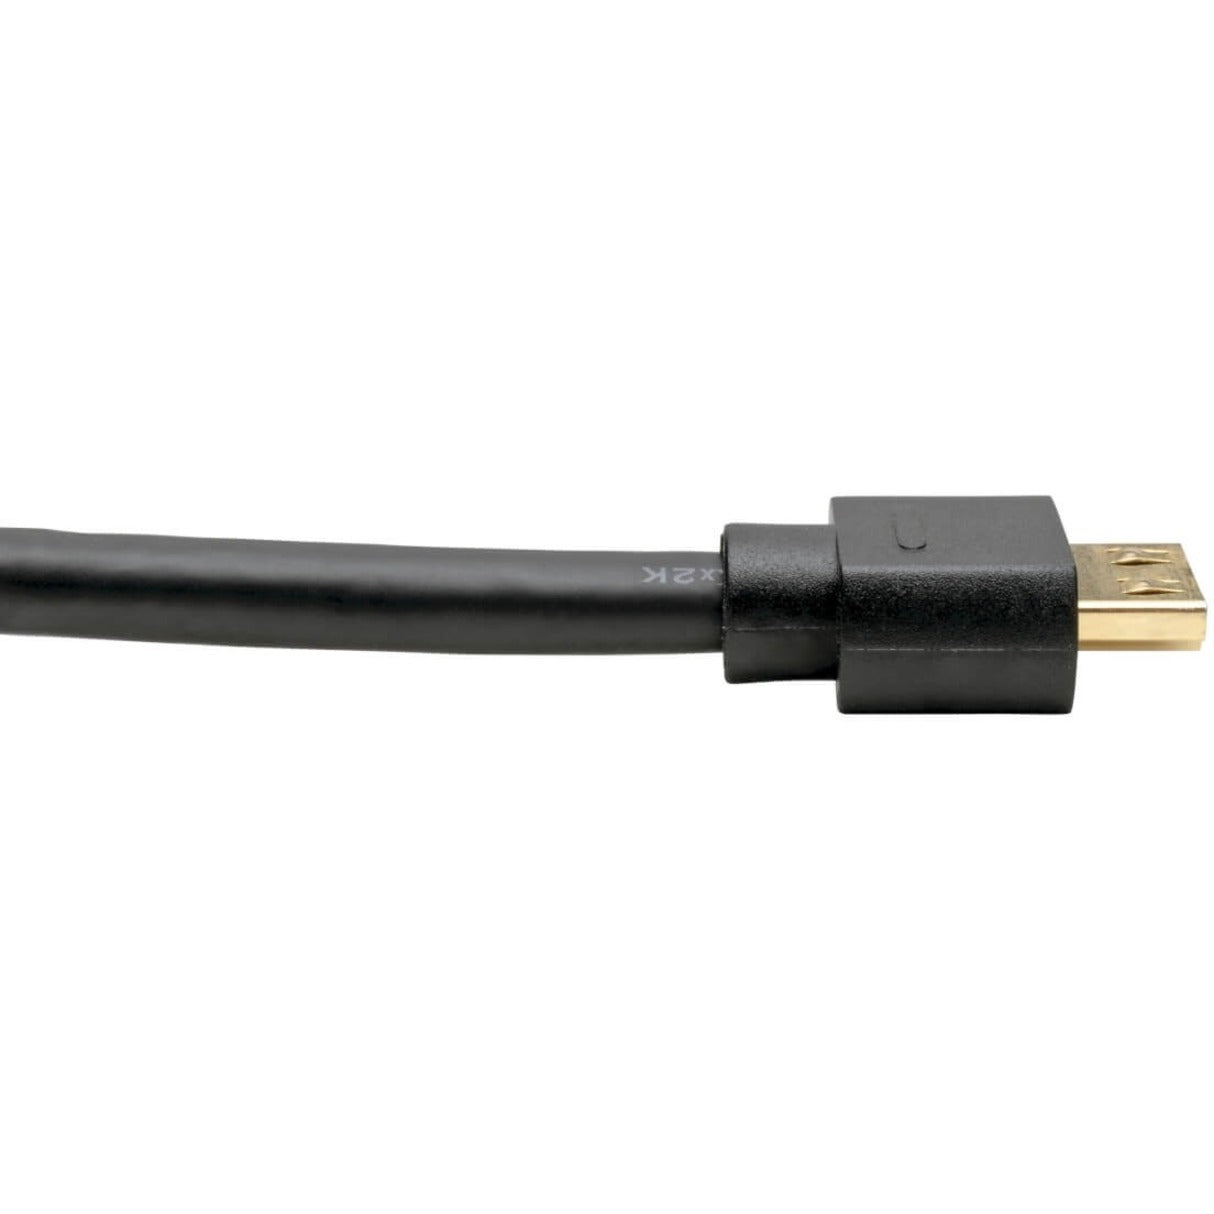 Tripp Lite P569-012-IND HDMI Audio/Video Cable With Ethernet, Water Resistant, Flexible, 12 ft